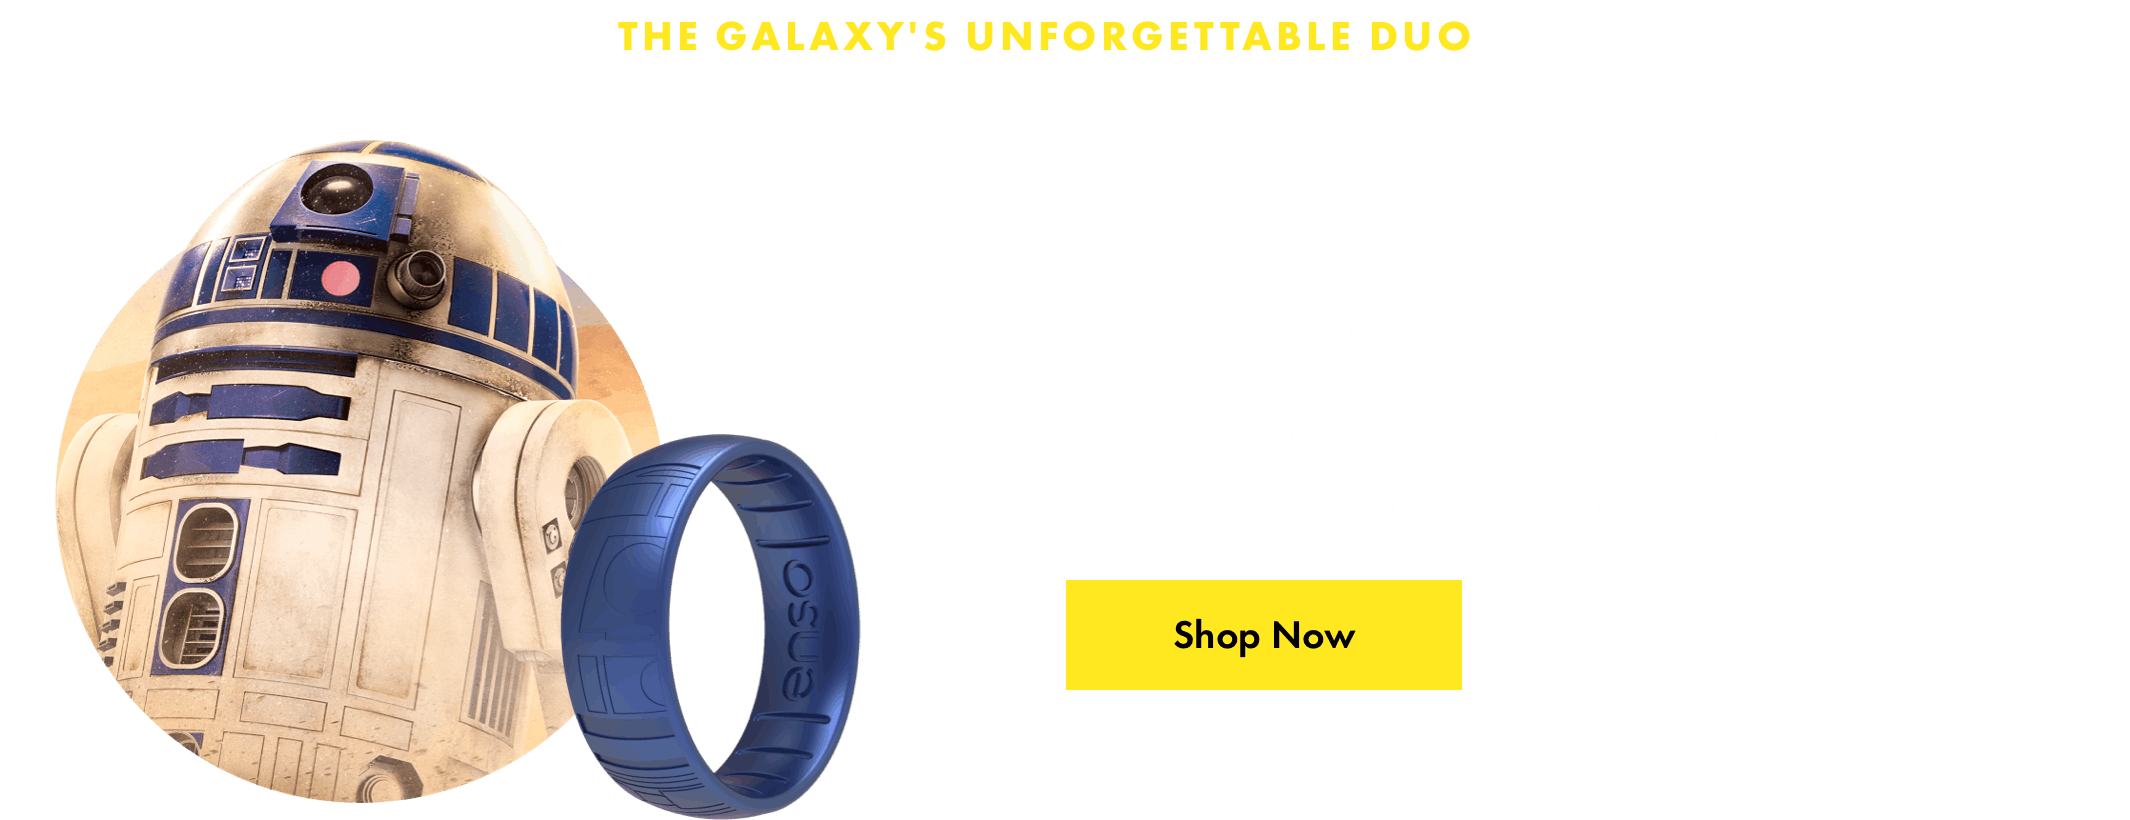  R2-D2™ ring. This ring, featuring R2-D2 art, will be your constant companion in all your galactic journeys. Click here to shop now.
